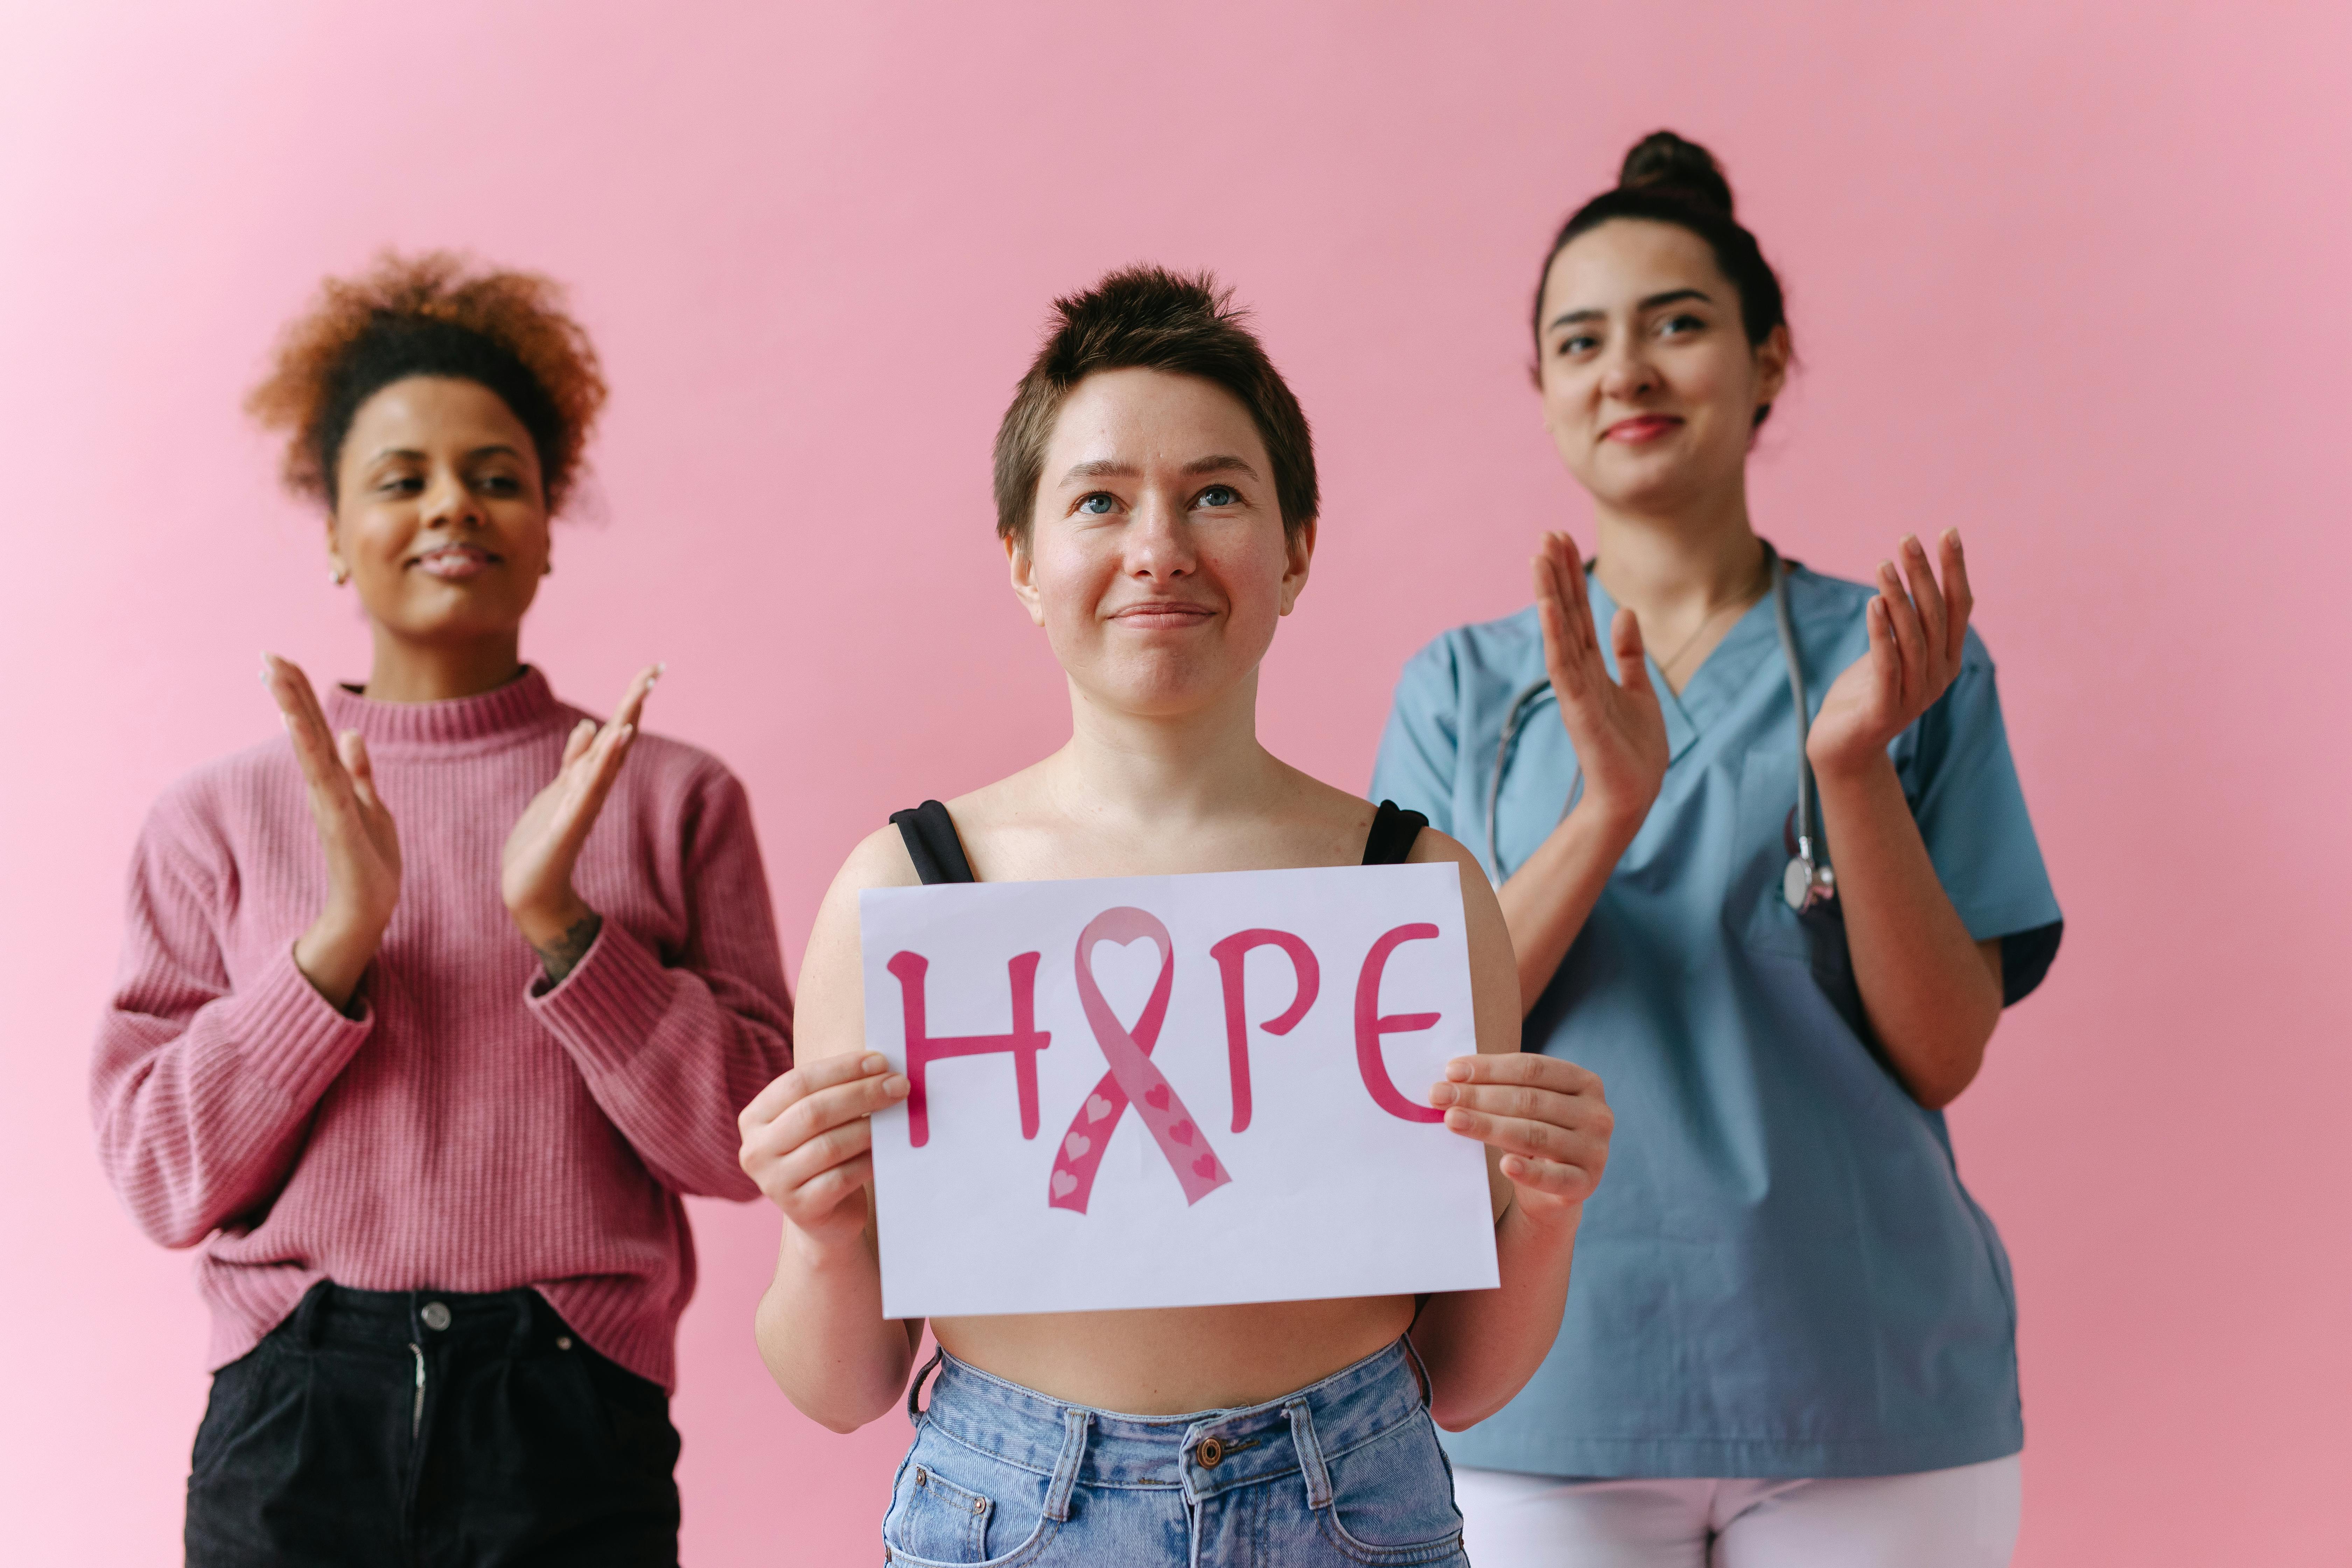 A group of women, one holding up a placard | Source: Pexels